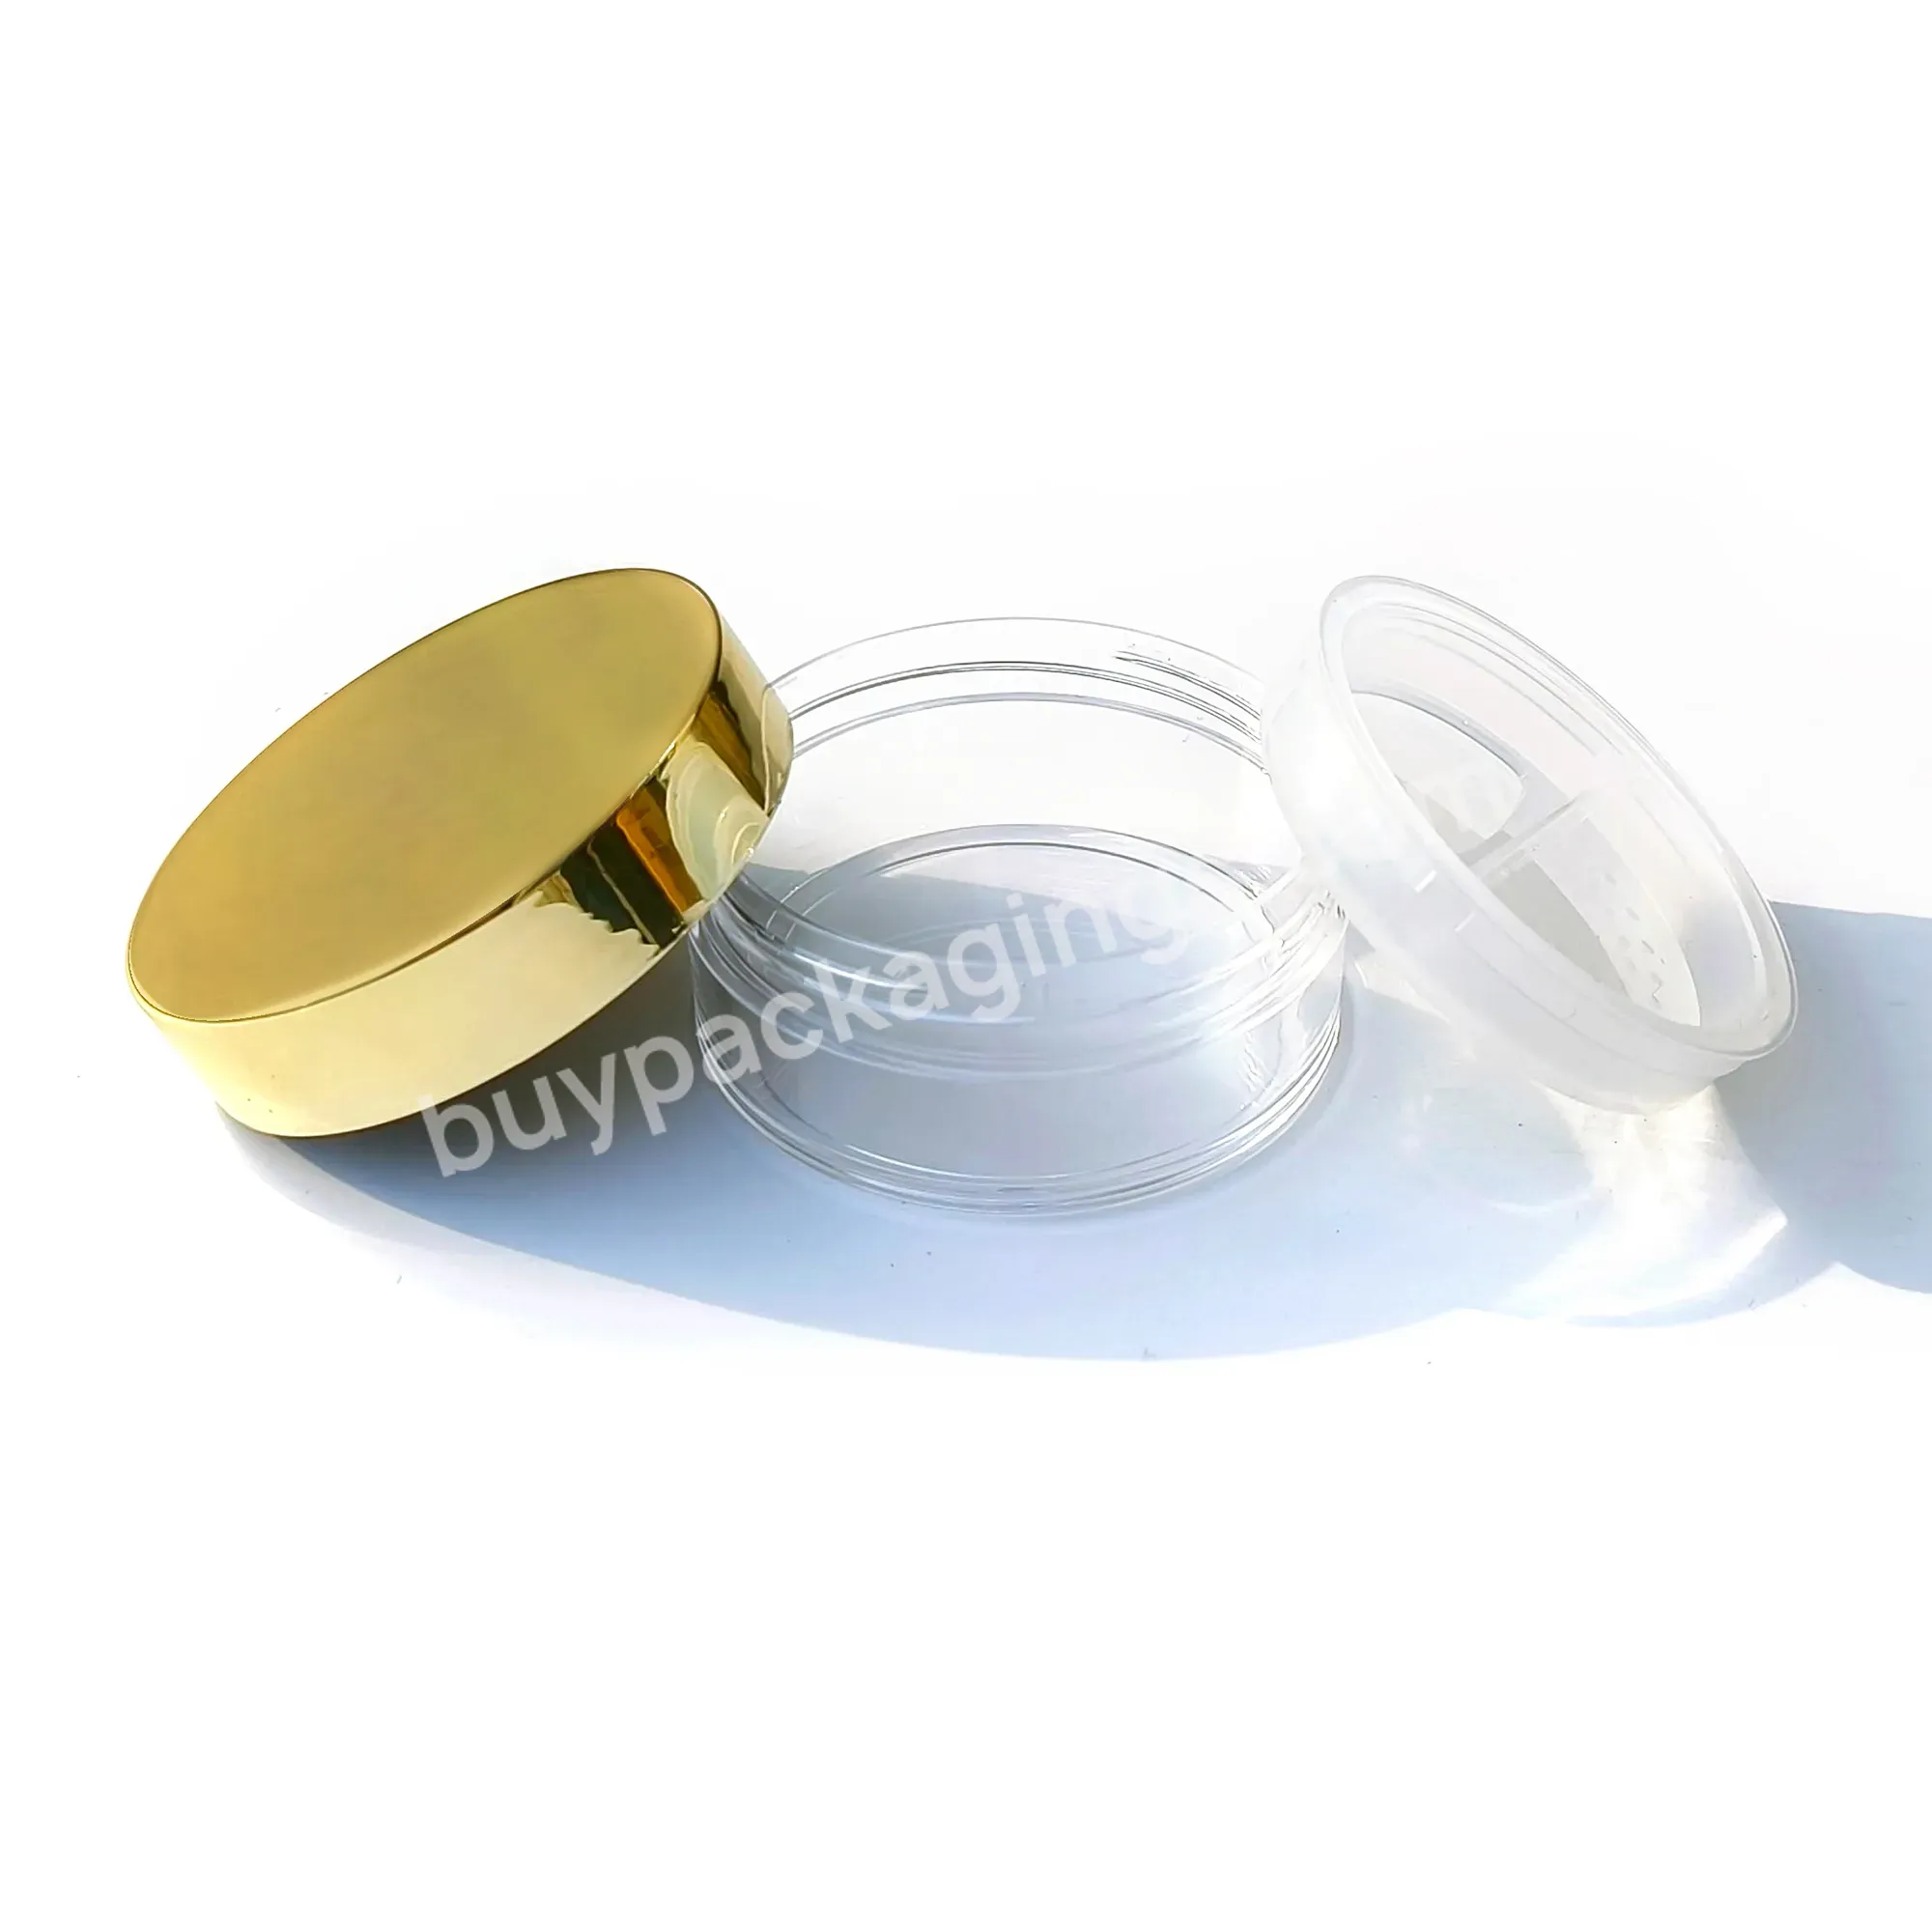 Powder Cosmetic Container 10g Plastic Makeup Powder Case Containers Face Loose Powder Case Cosmetic Packing Ps Luxury